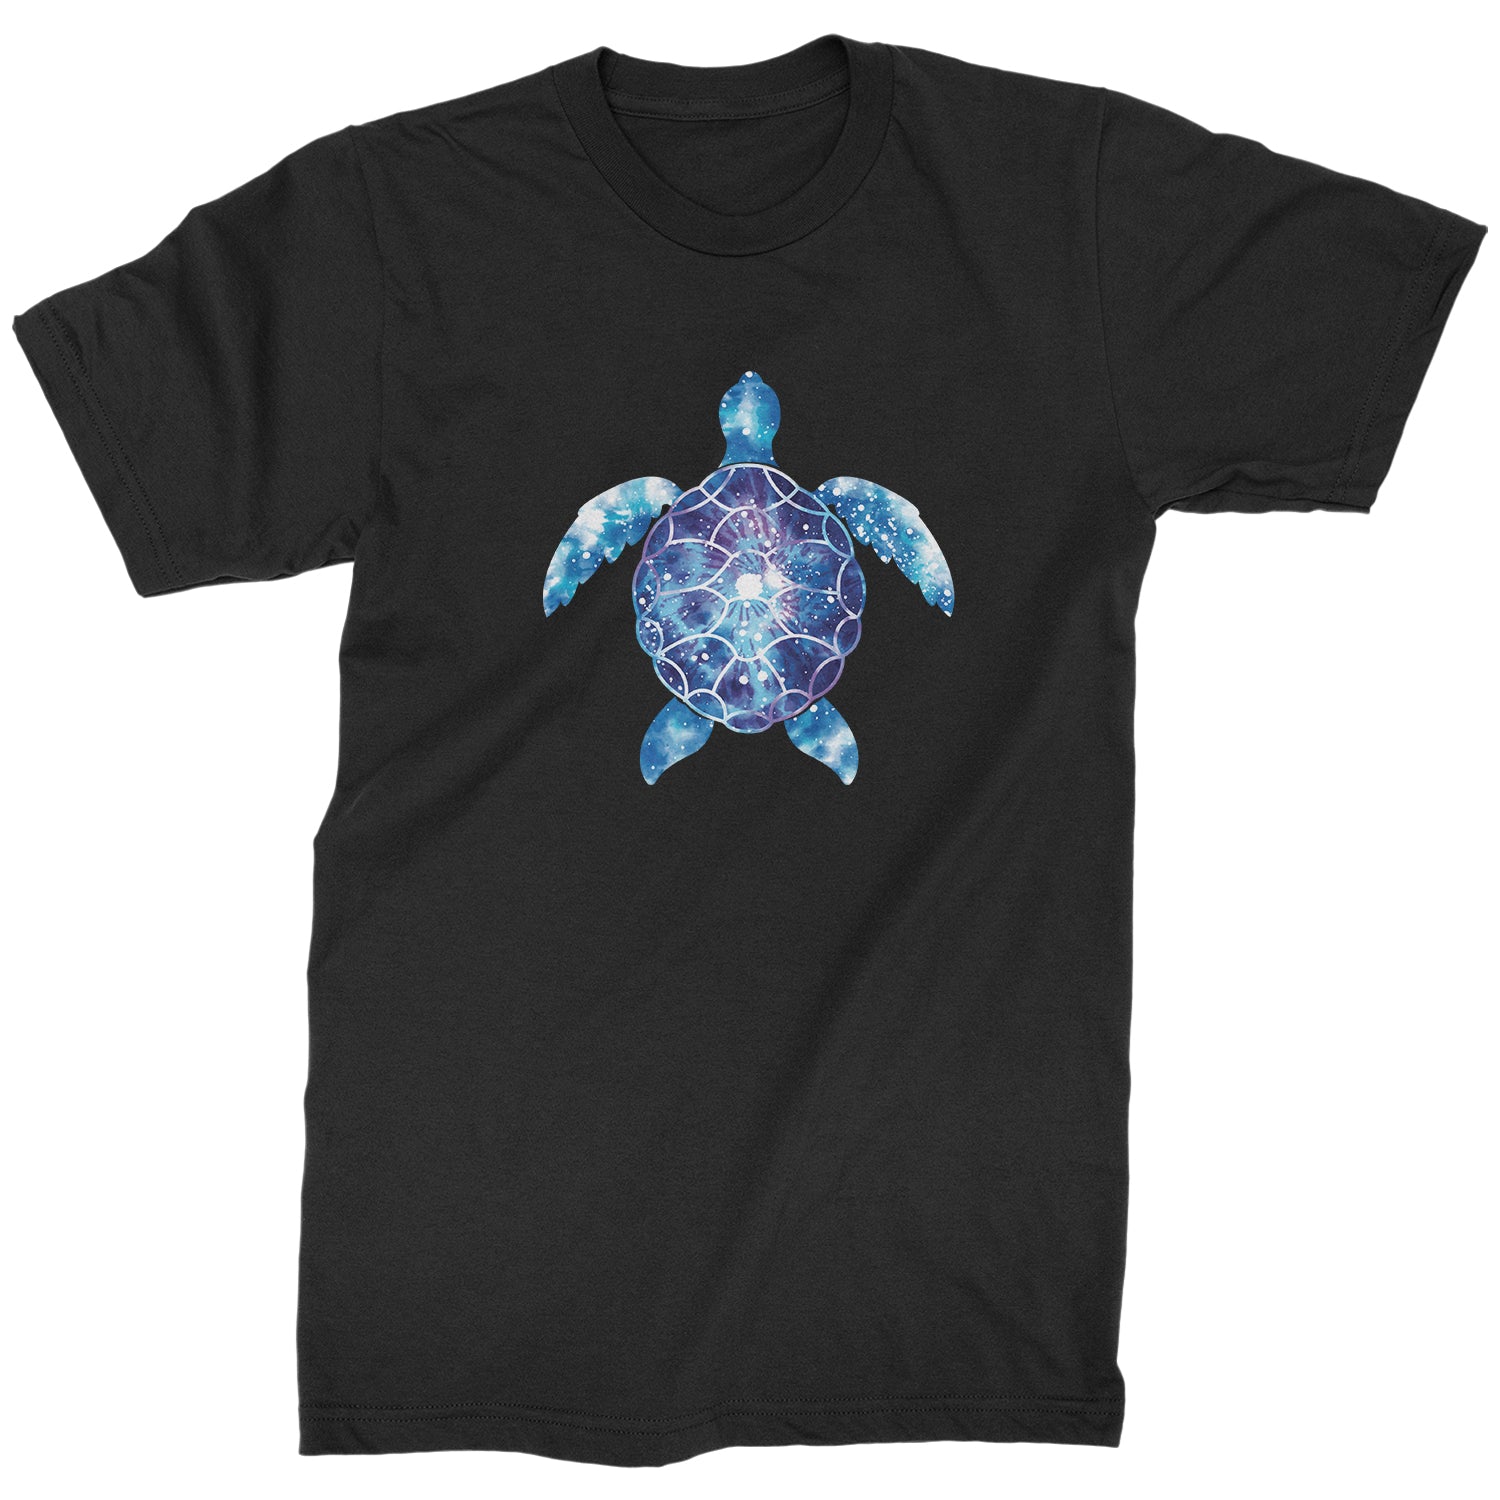 Tie Dye Sea Turtle Mens T-shirt eco, friendly, life, ocean, turtle by Expression Tees